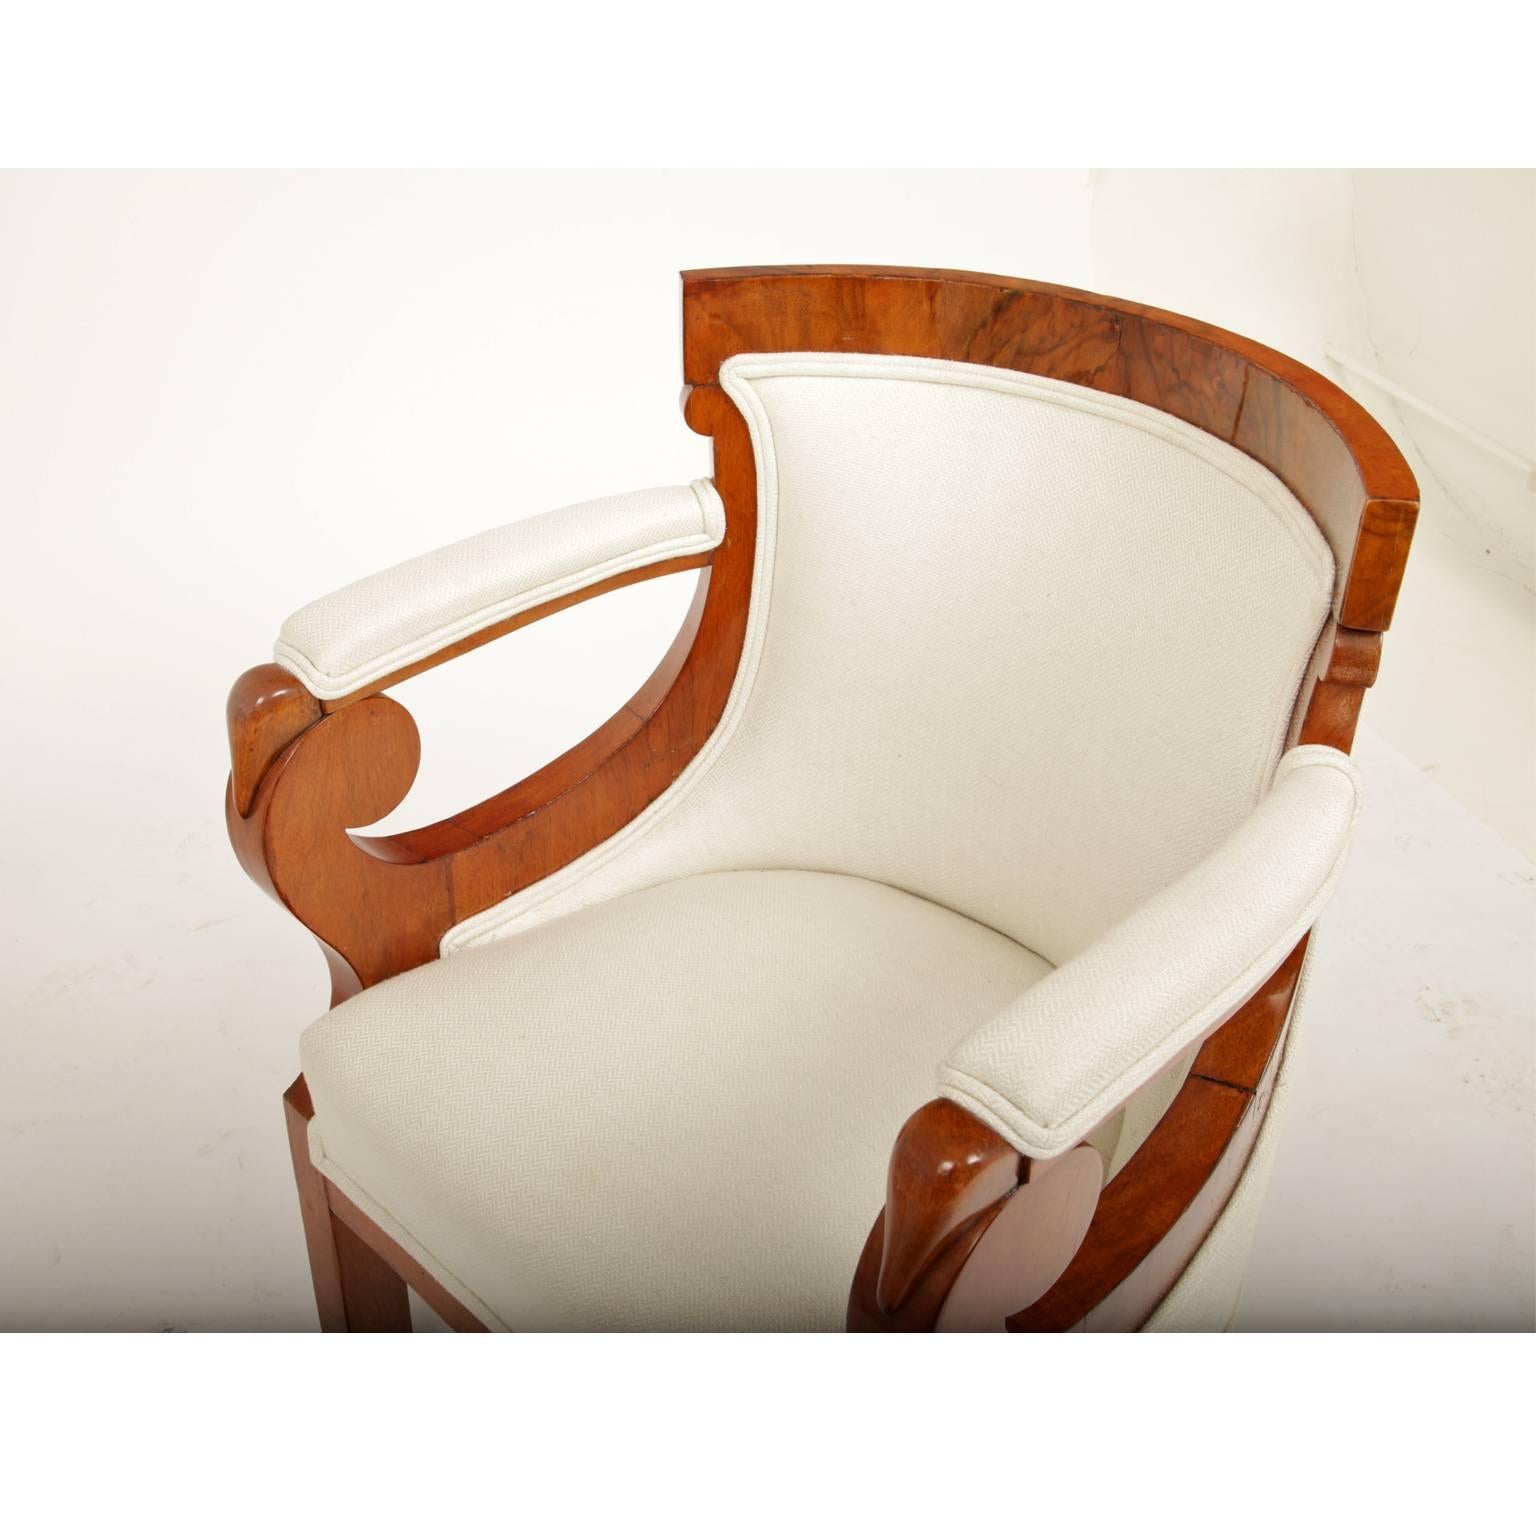 Pair of Biedermeier bergere chairs with unusually designed armrests. The backrest is curved and covered in a crème colored fabric. Seat, backrest and armrests are upholstered.